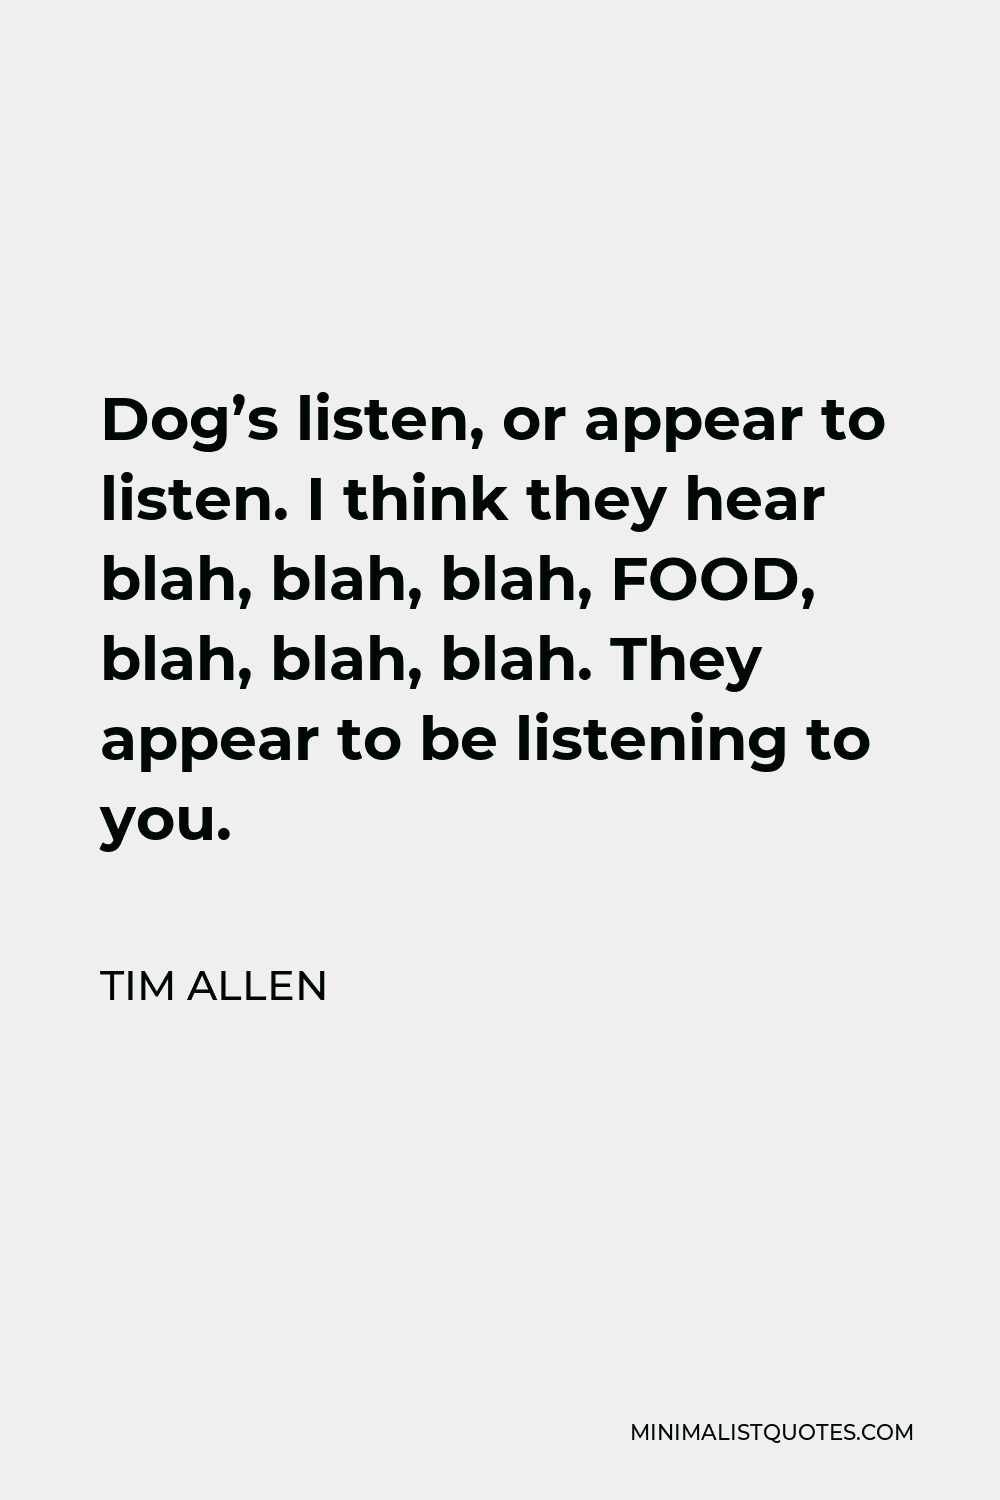 Tim Allen Quote - Dog’s listen, or appear to listen. I think they hear blah, blah, blah, FOOD, blah, blah, blah. They appear to be listening to you.